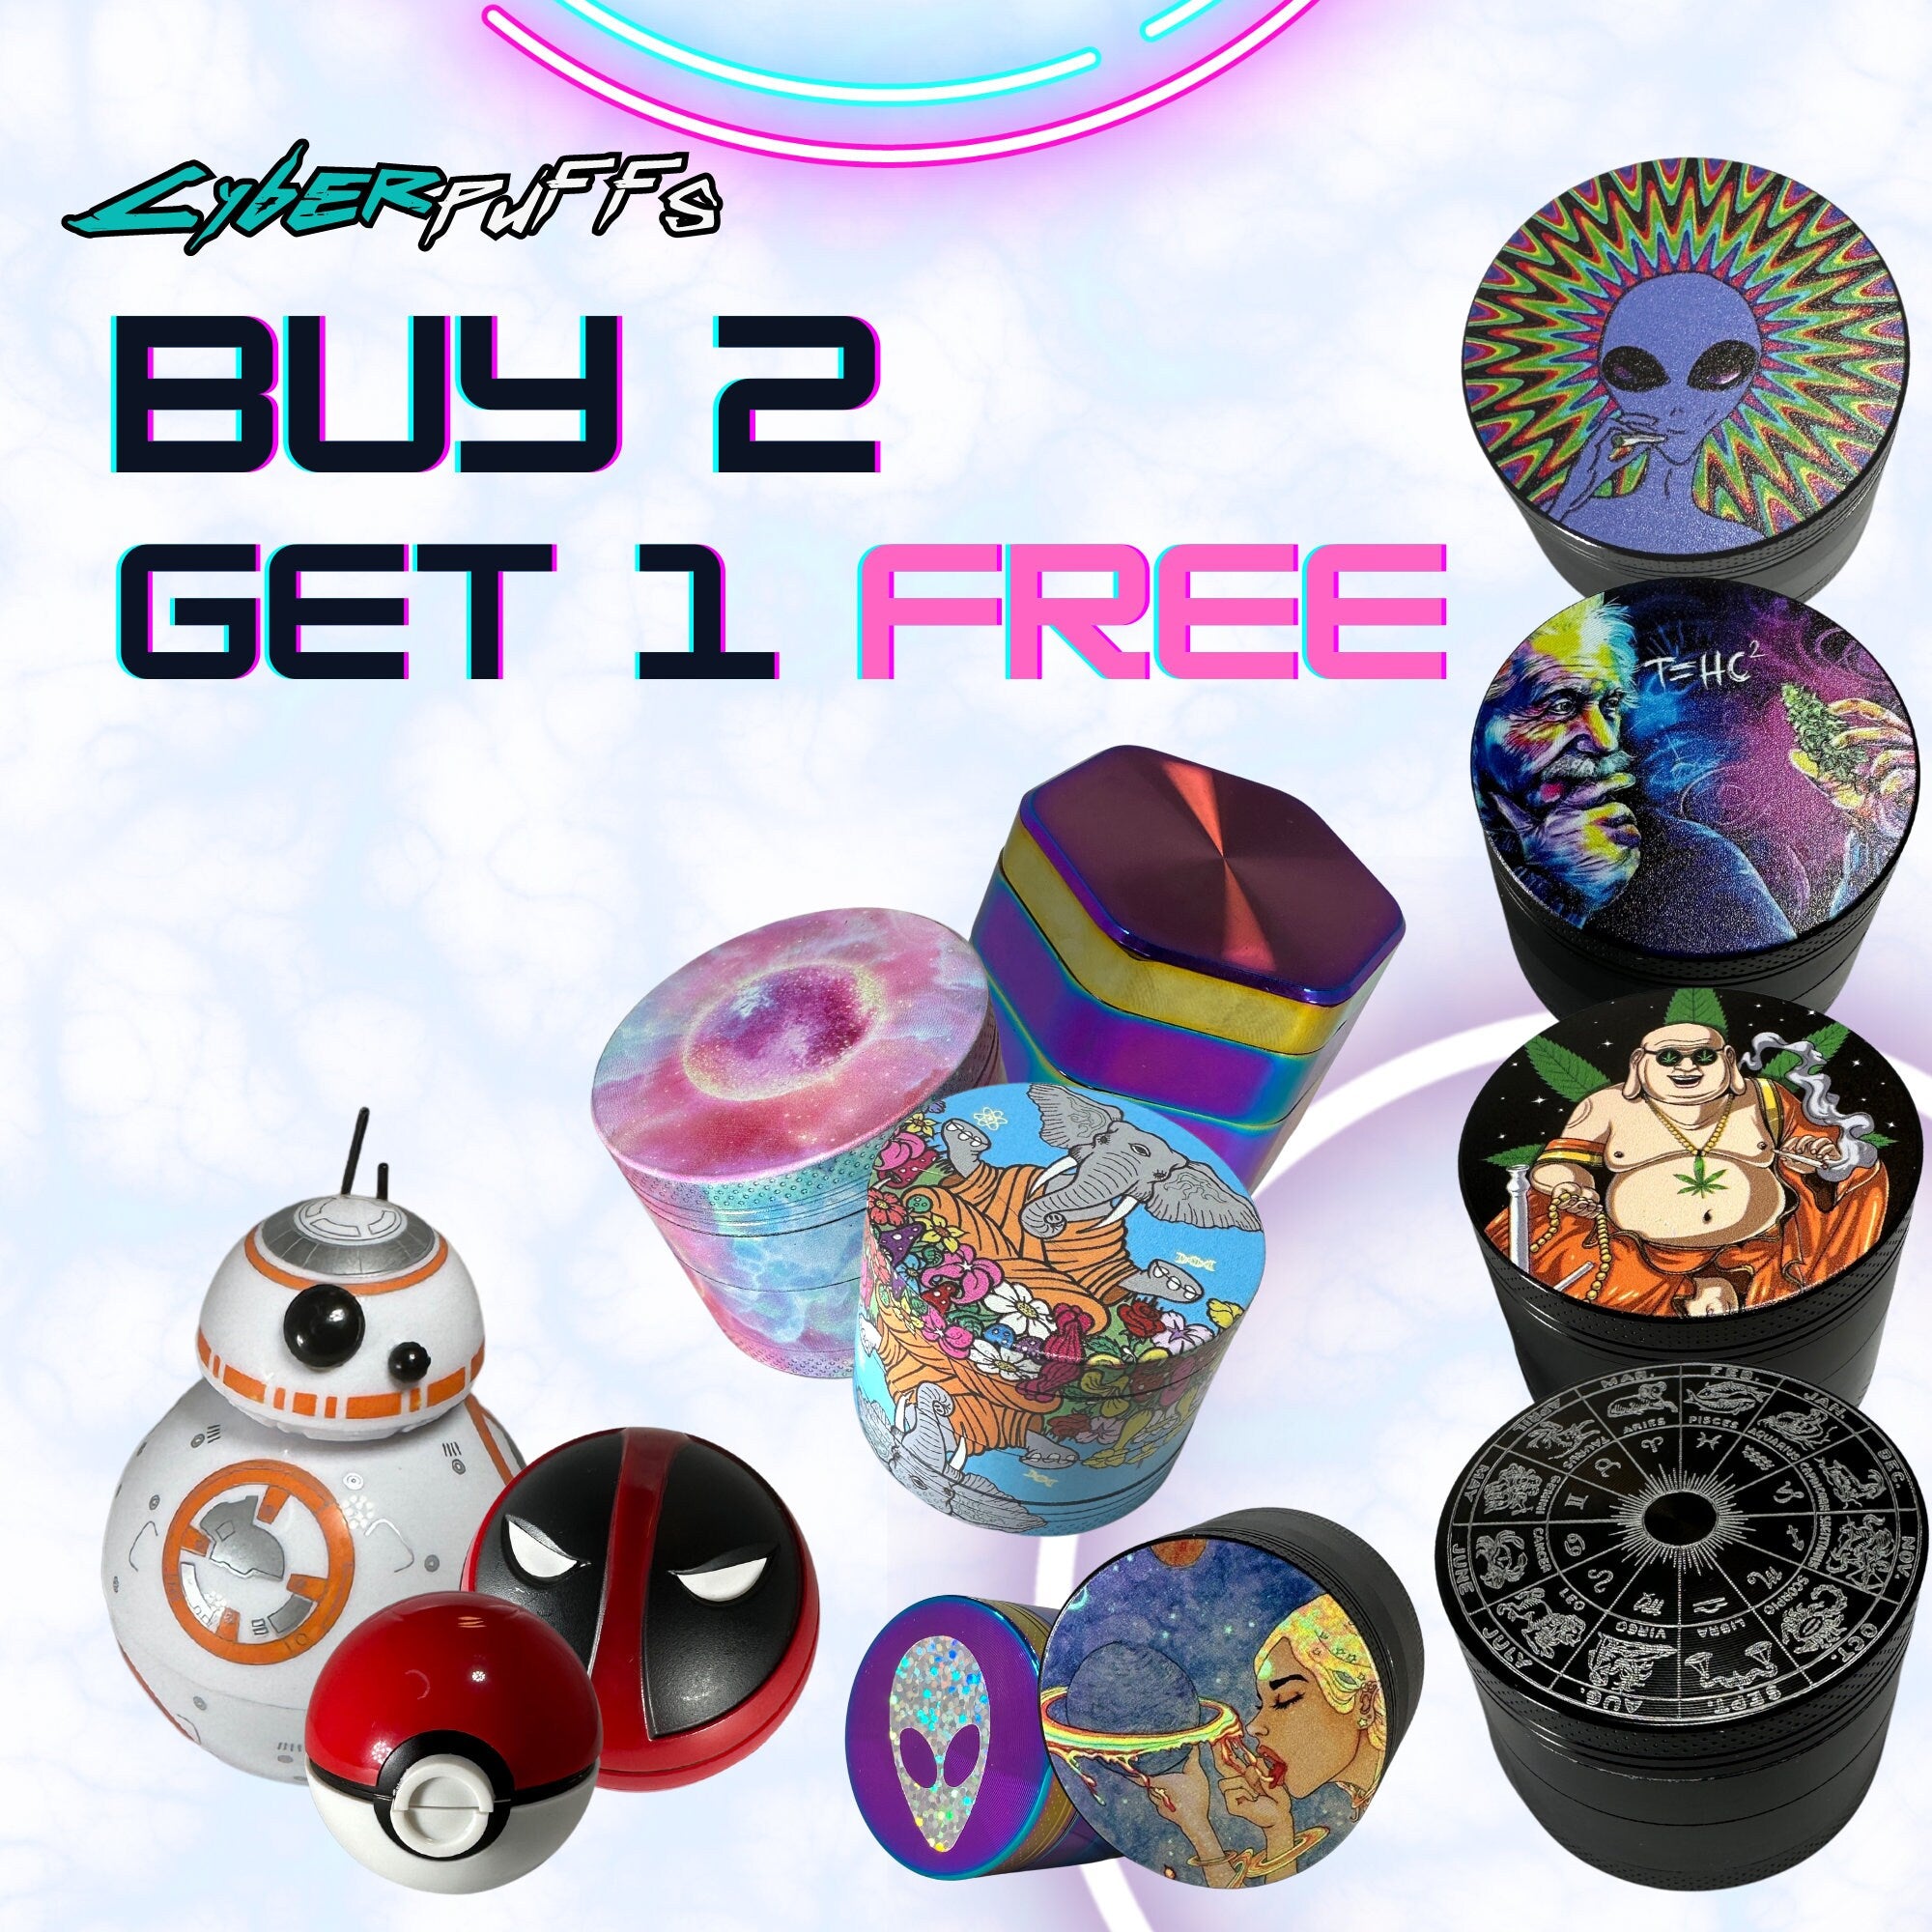 Cute Weed Grinder | Rainbow, butterfly cannabis grinders, space eye, accessories, 4 piece grinder, Pink Psychedelic Trippy Herb Girly, black